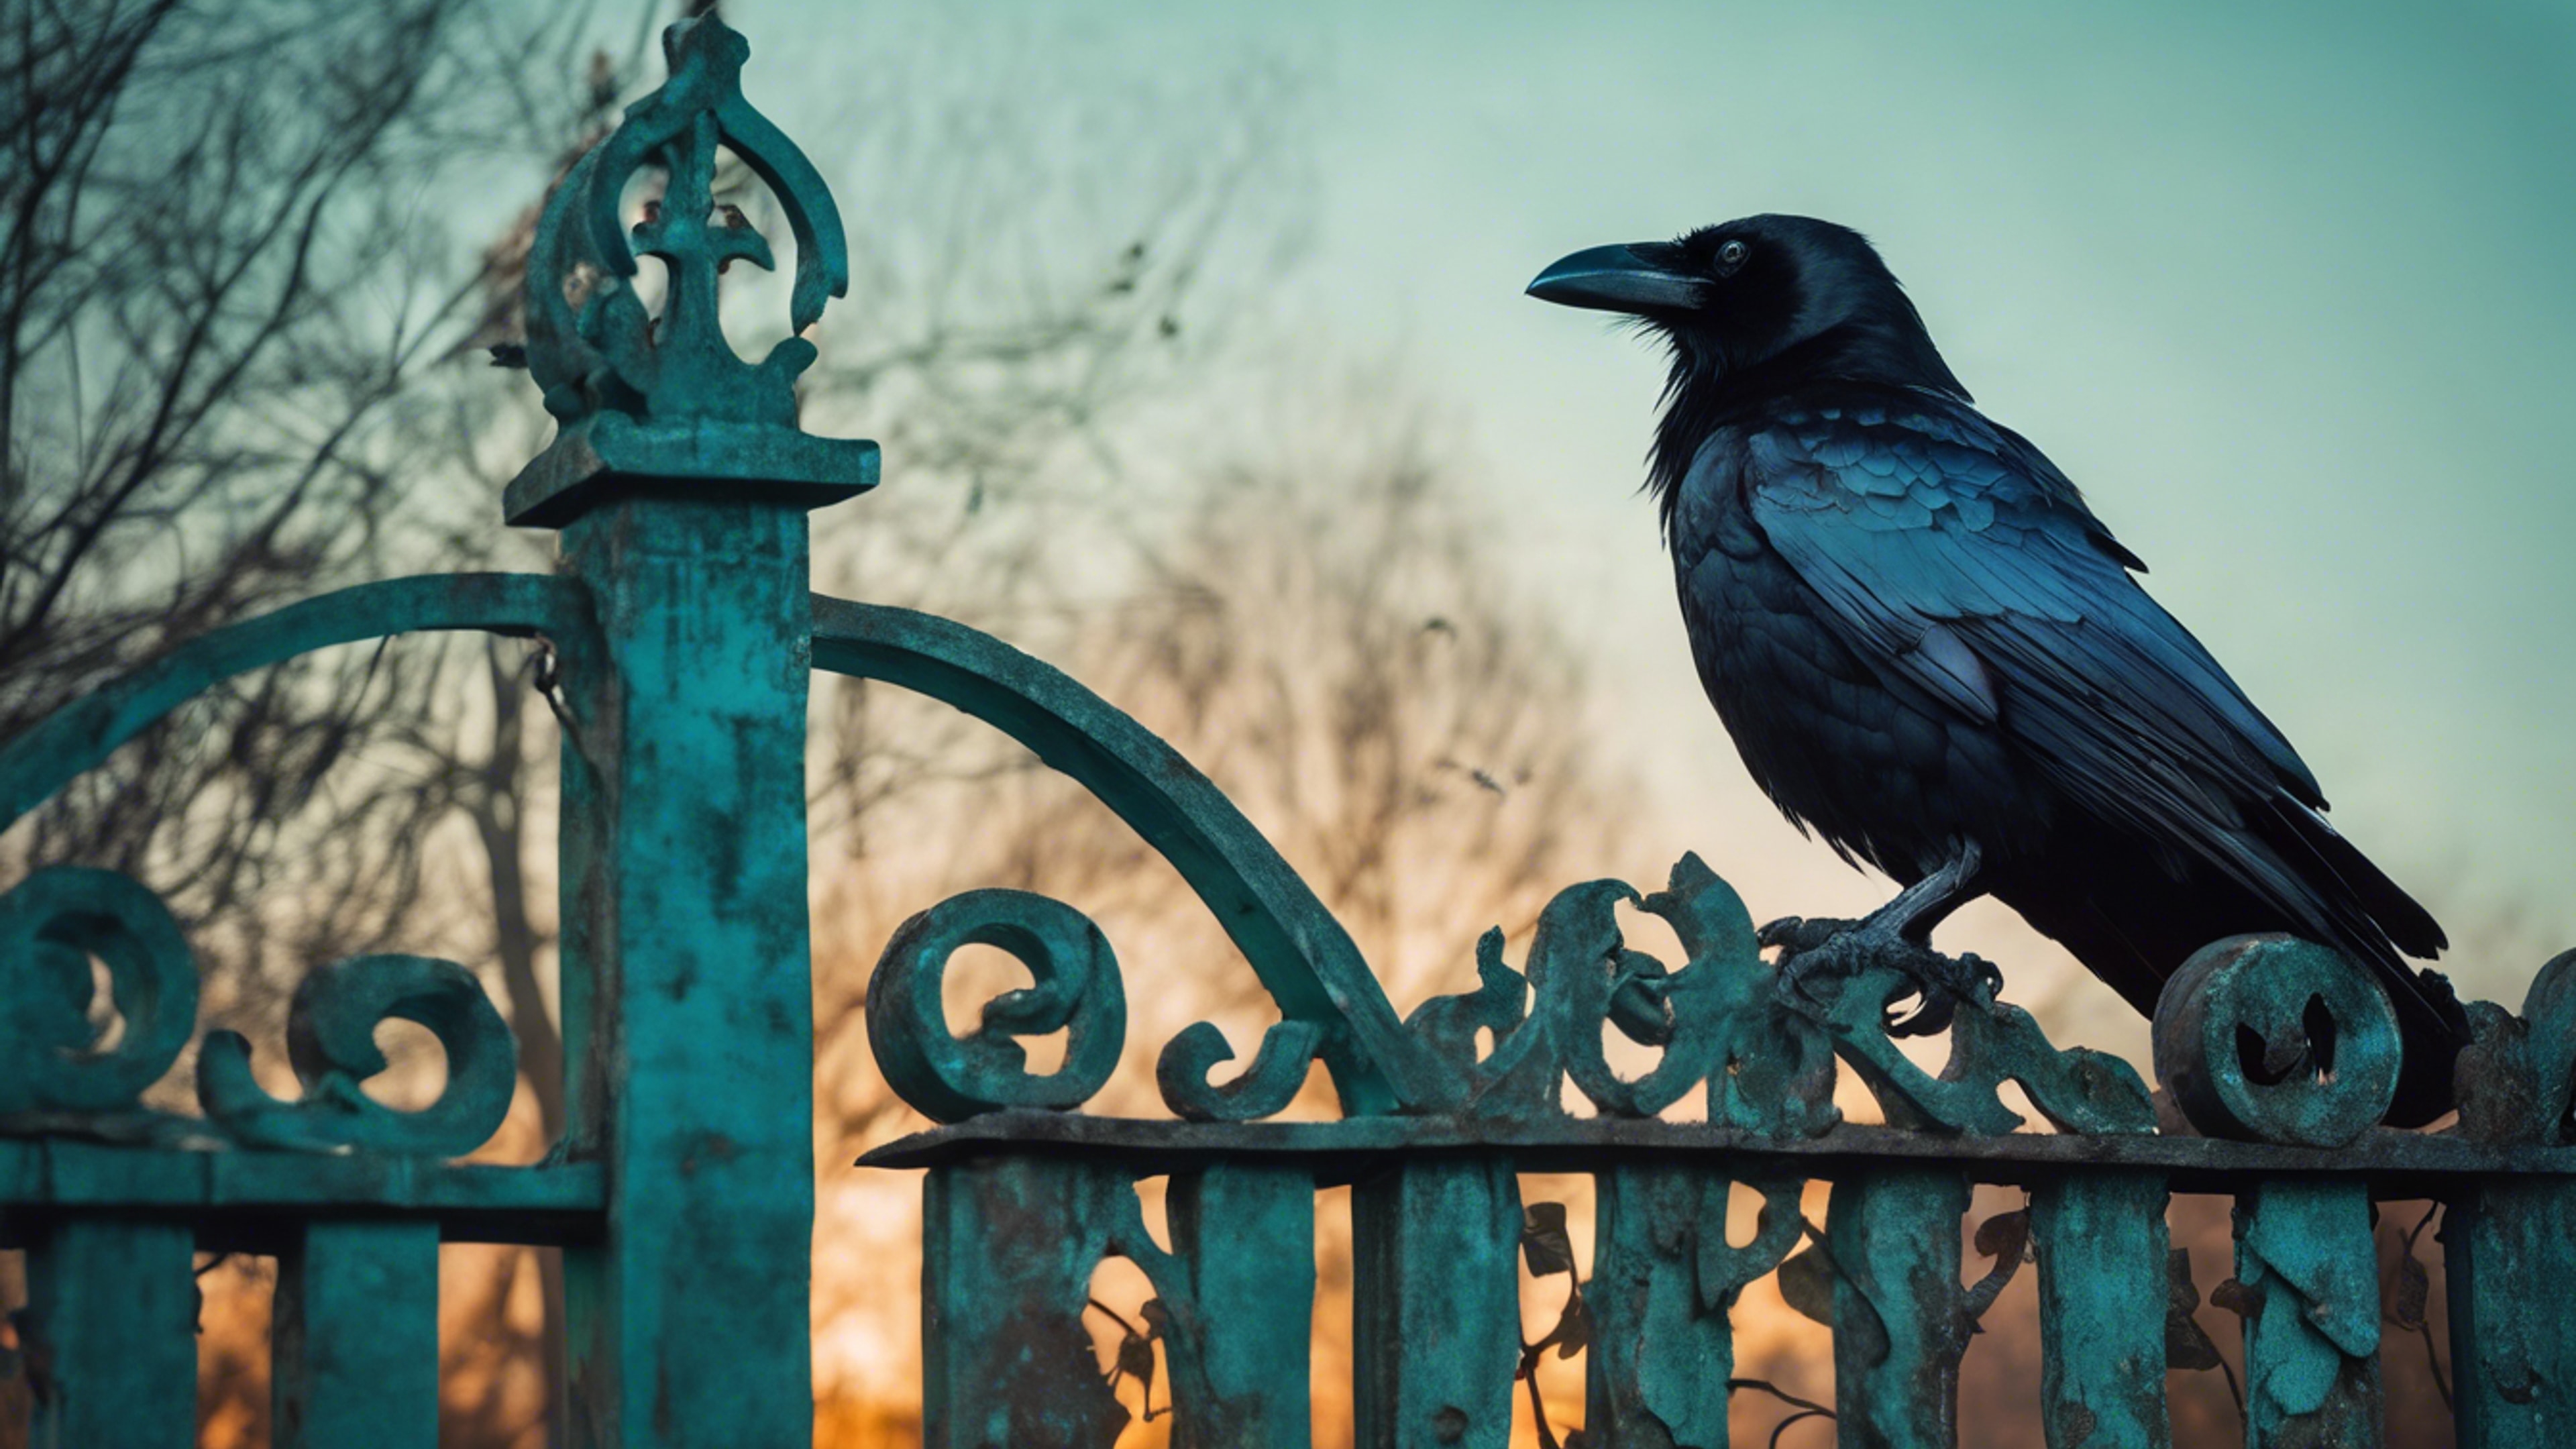 A Gothic raven perched on a dilapidated garden gate, aglow with the mesmerizing light of a teal moon. Валлпапер[c5fc313733614ce1ad34]